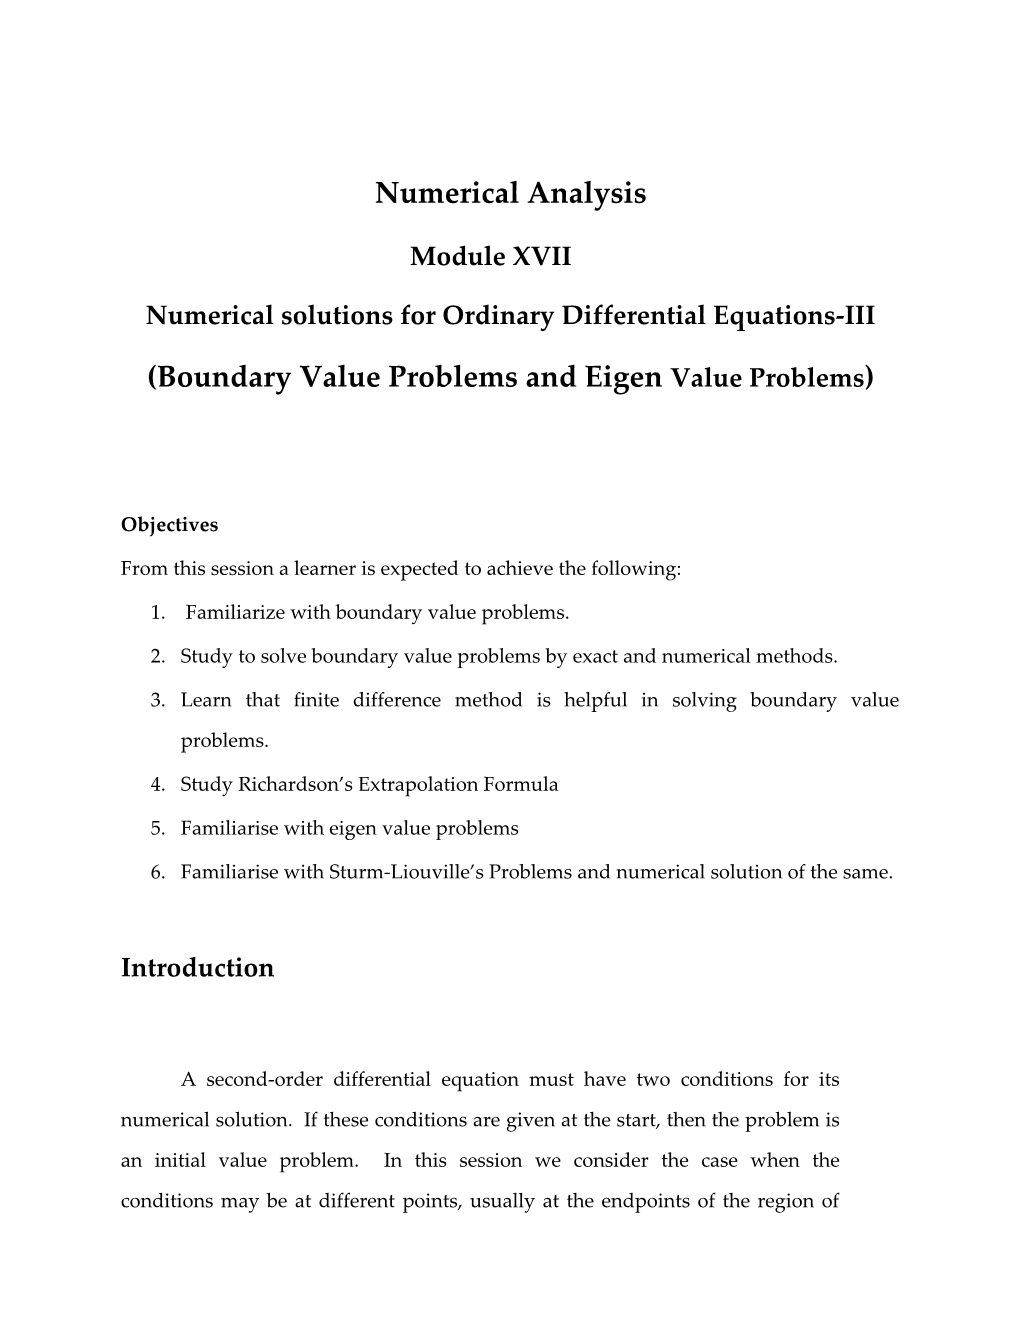 Numerical Solutions for Ordinary Differential Equations-III